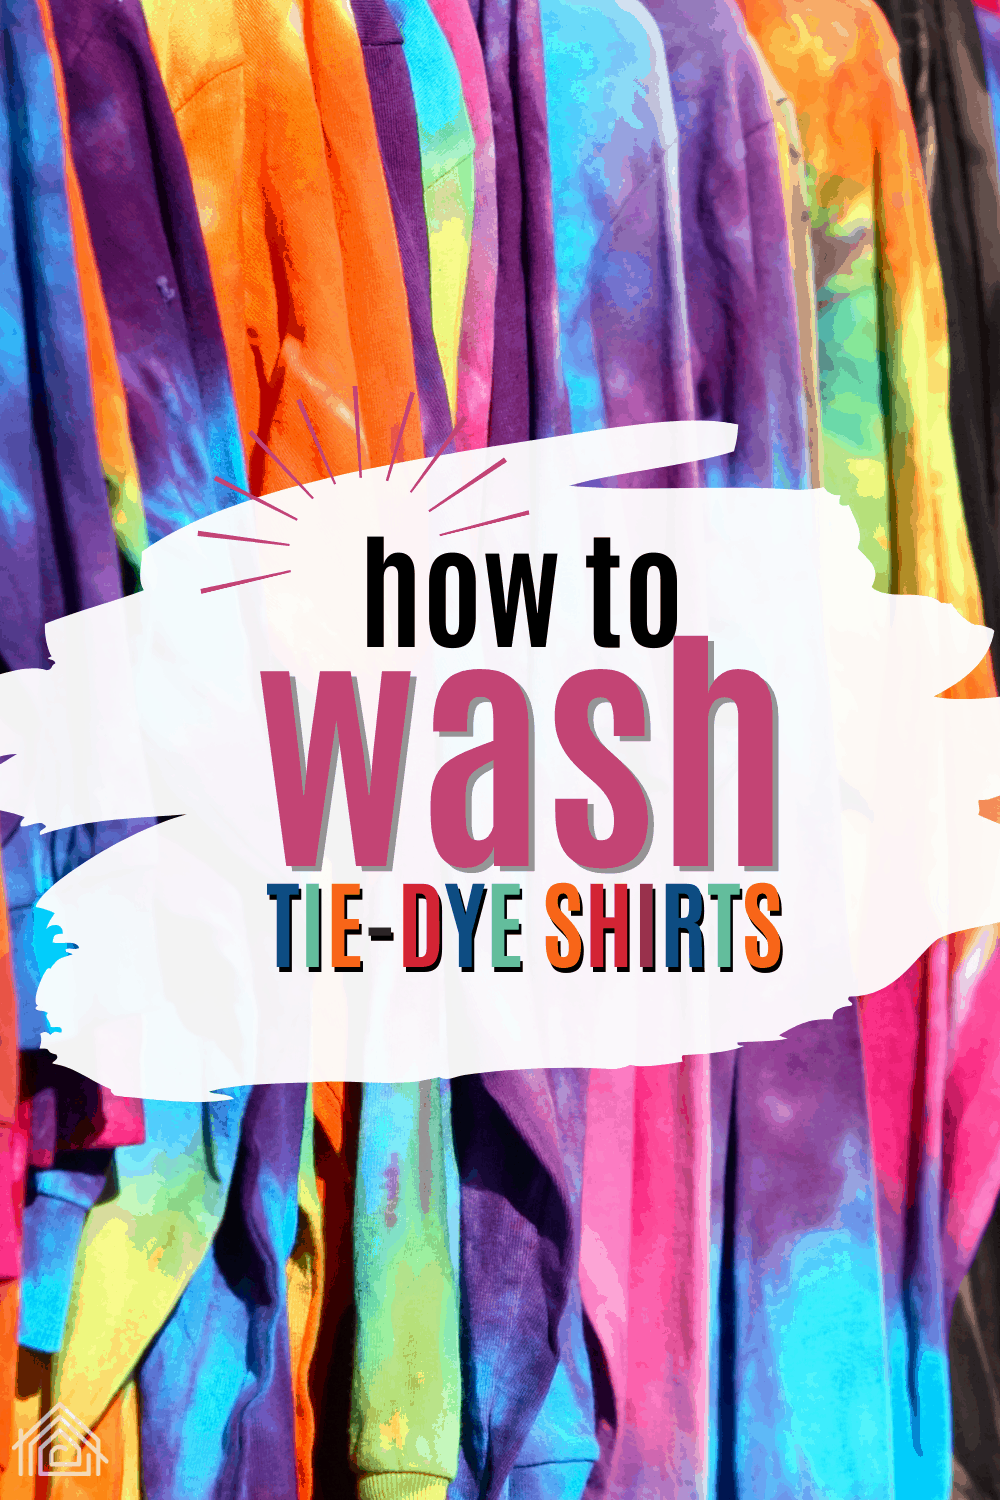 If you've ever had a tie-dye shirt, then you'll know that one of the hardest parts is knowing how to wash them. Here's what you need to know to keep your shirts looking great via @mystayathome